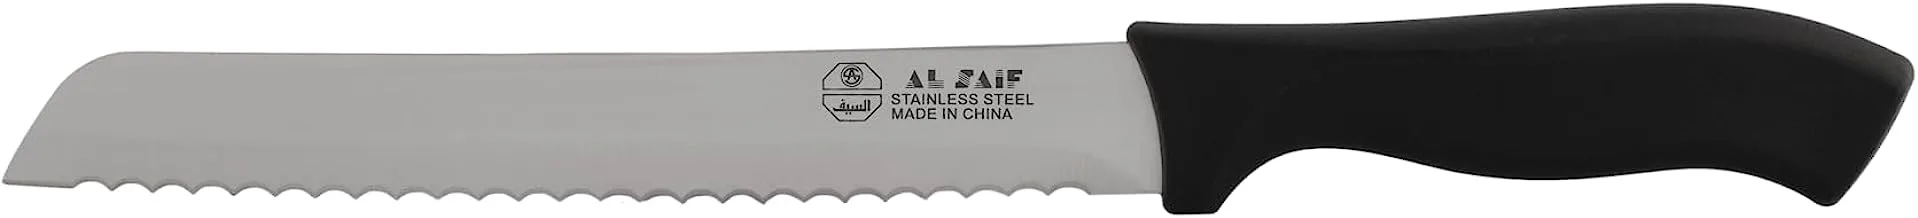 Al Saif Stainless Steel Bread Knife, 8-Inch Size, White